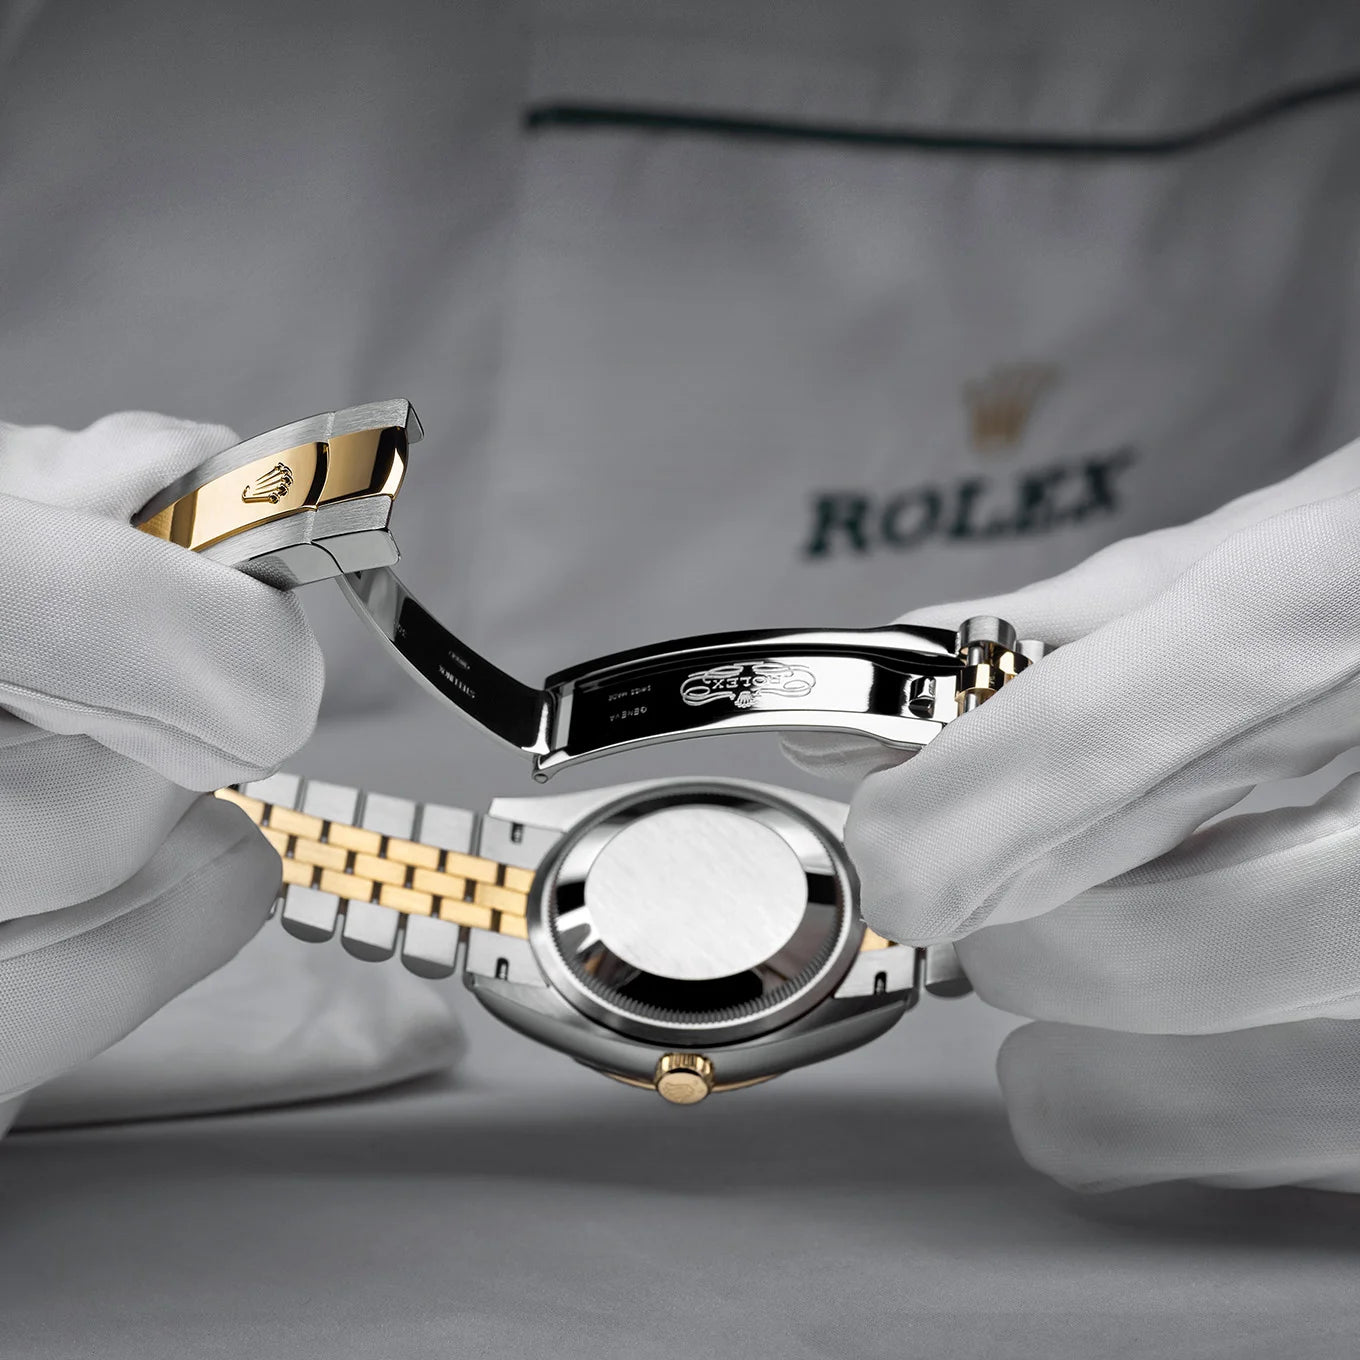 Servicing Your Rolex at Orr's Jewelers in Sewickley, PA